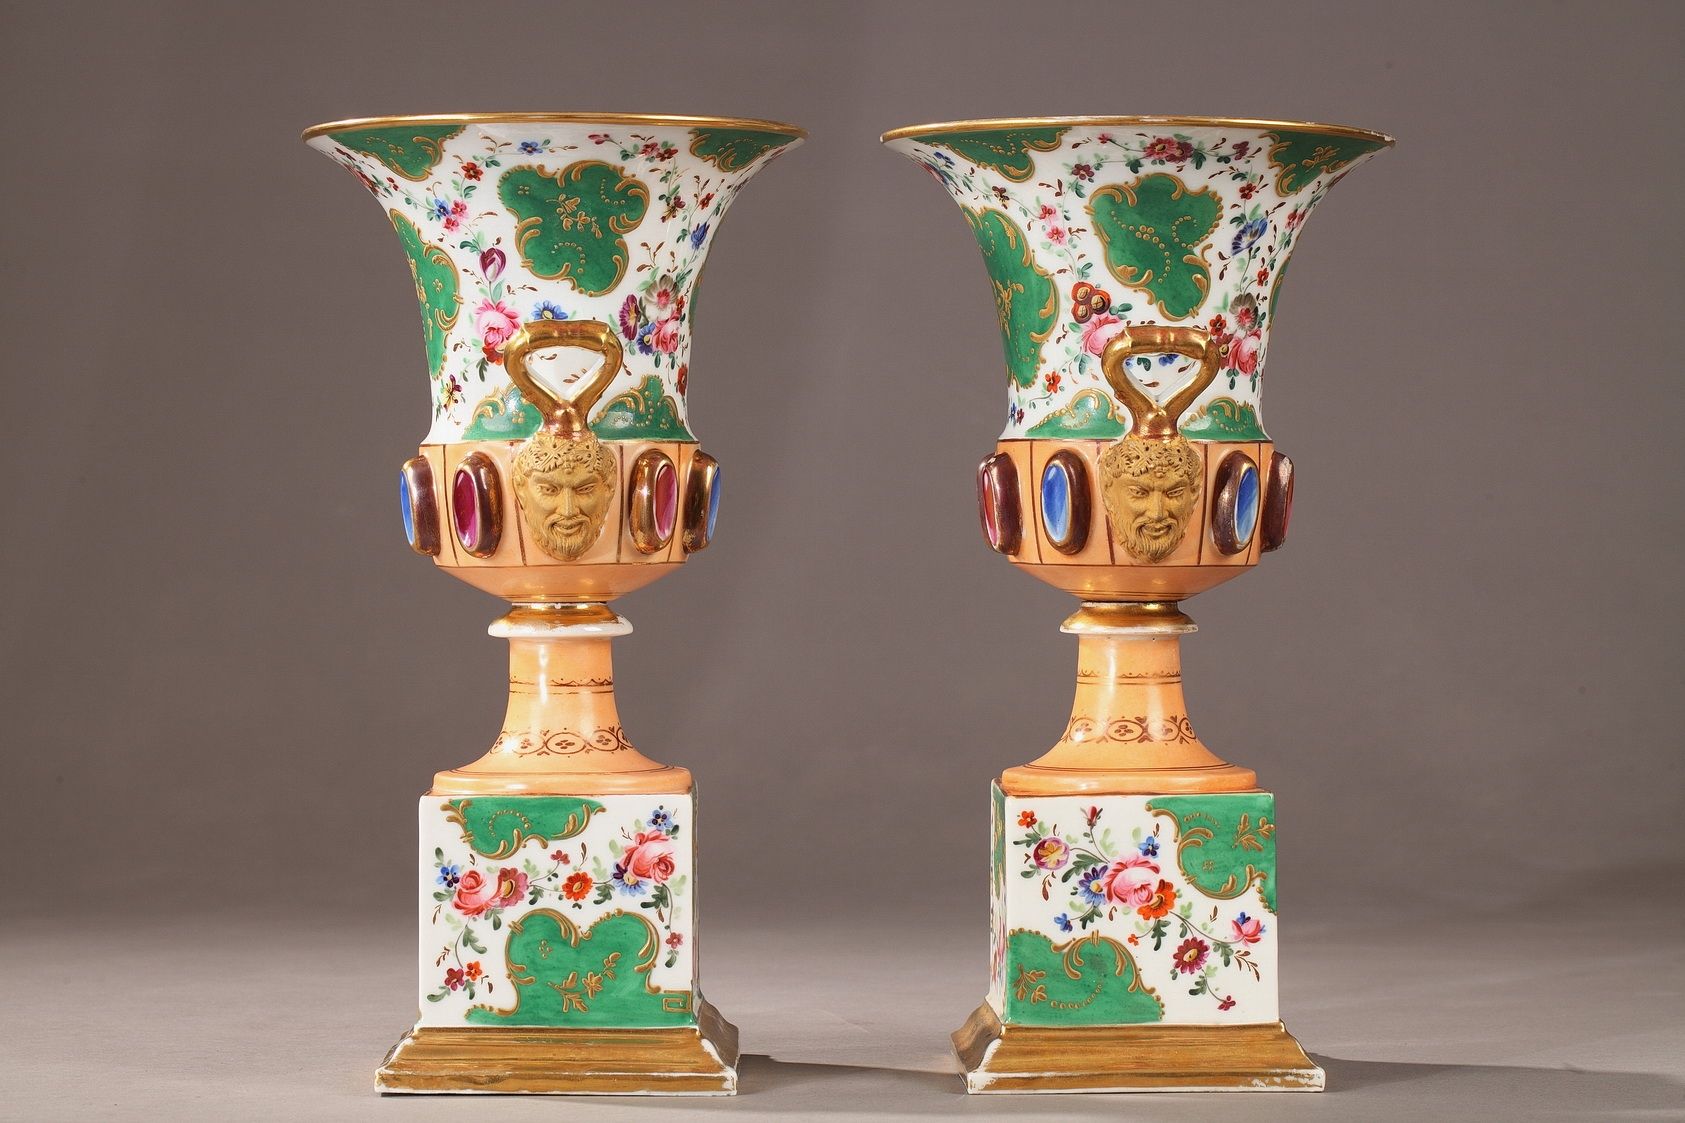 MEDICIS VASES IN PORCELAIN FROM THE LOUIS-PHILIPPE PERIOD